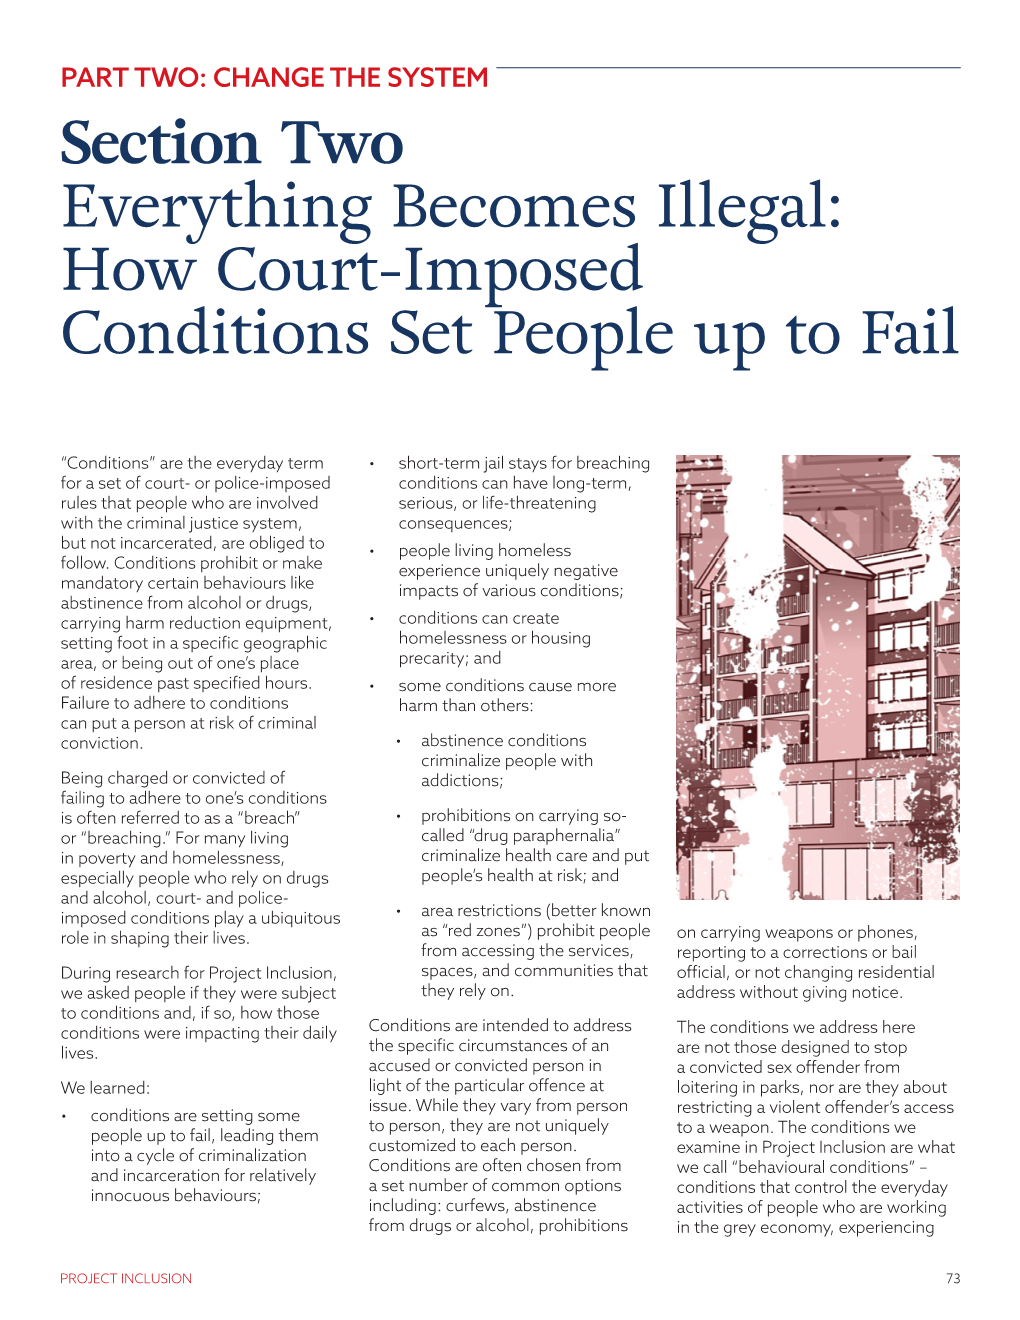 How Court-Imposed Conditions Set People up to Fail